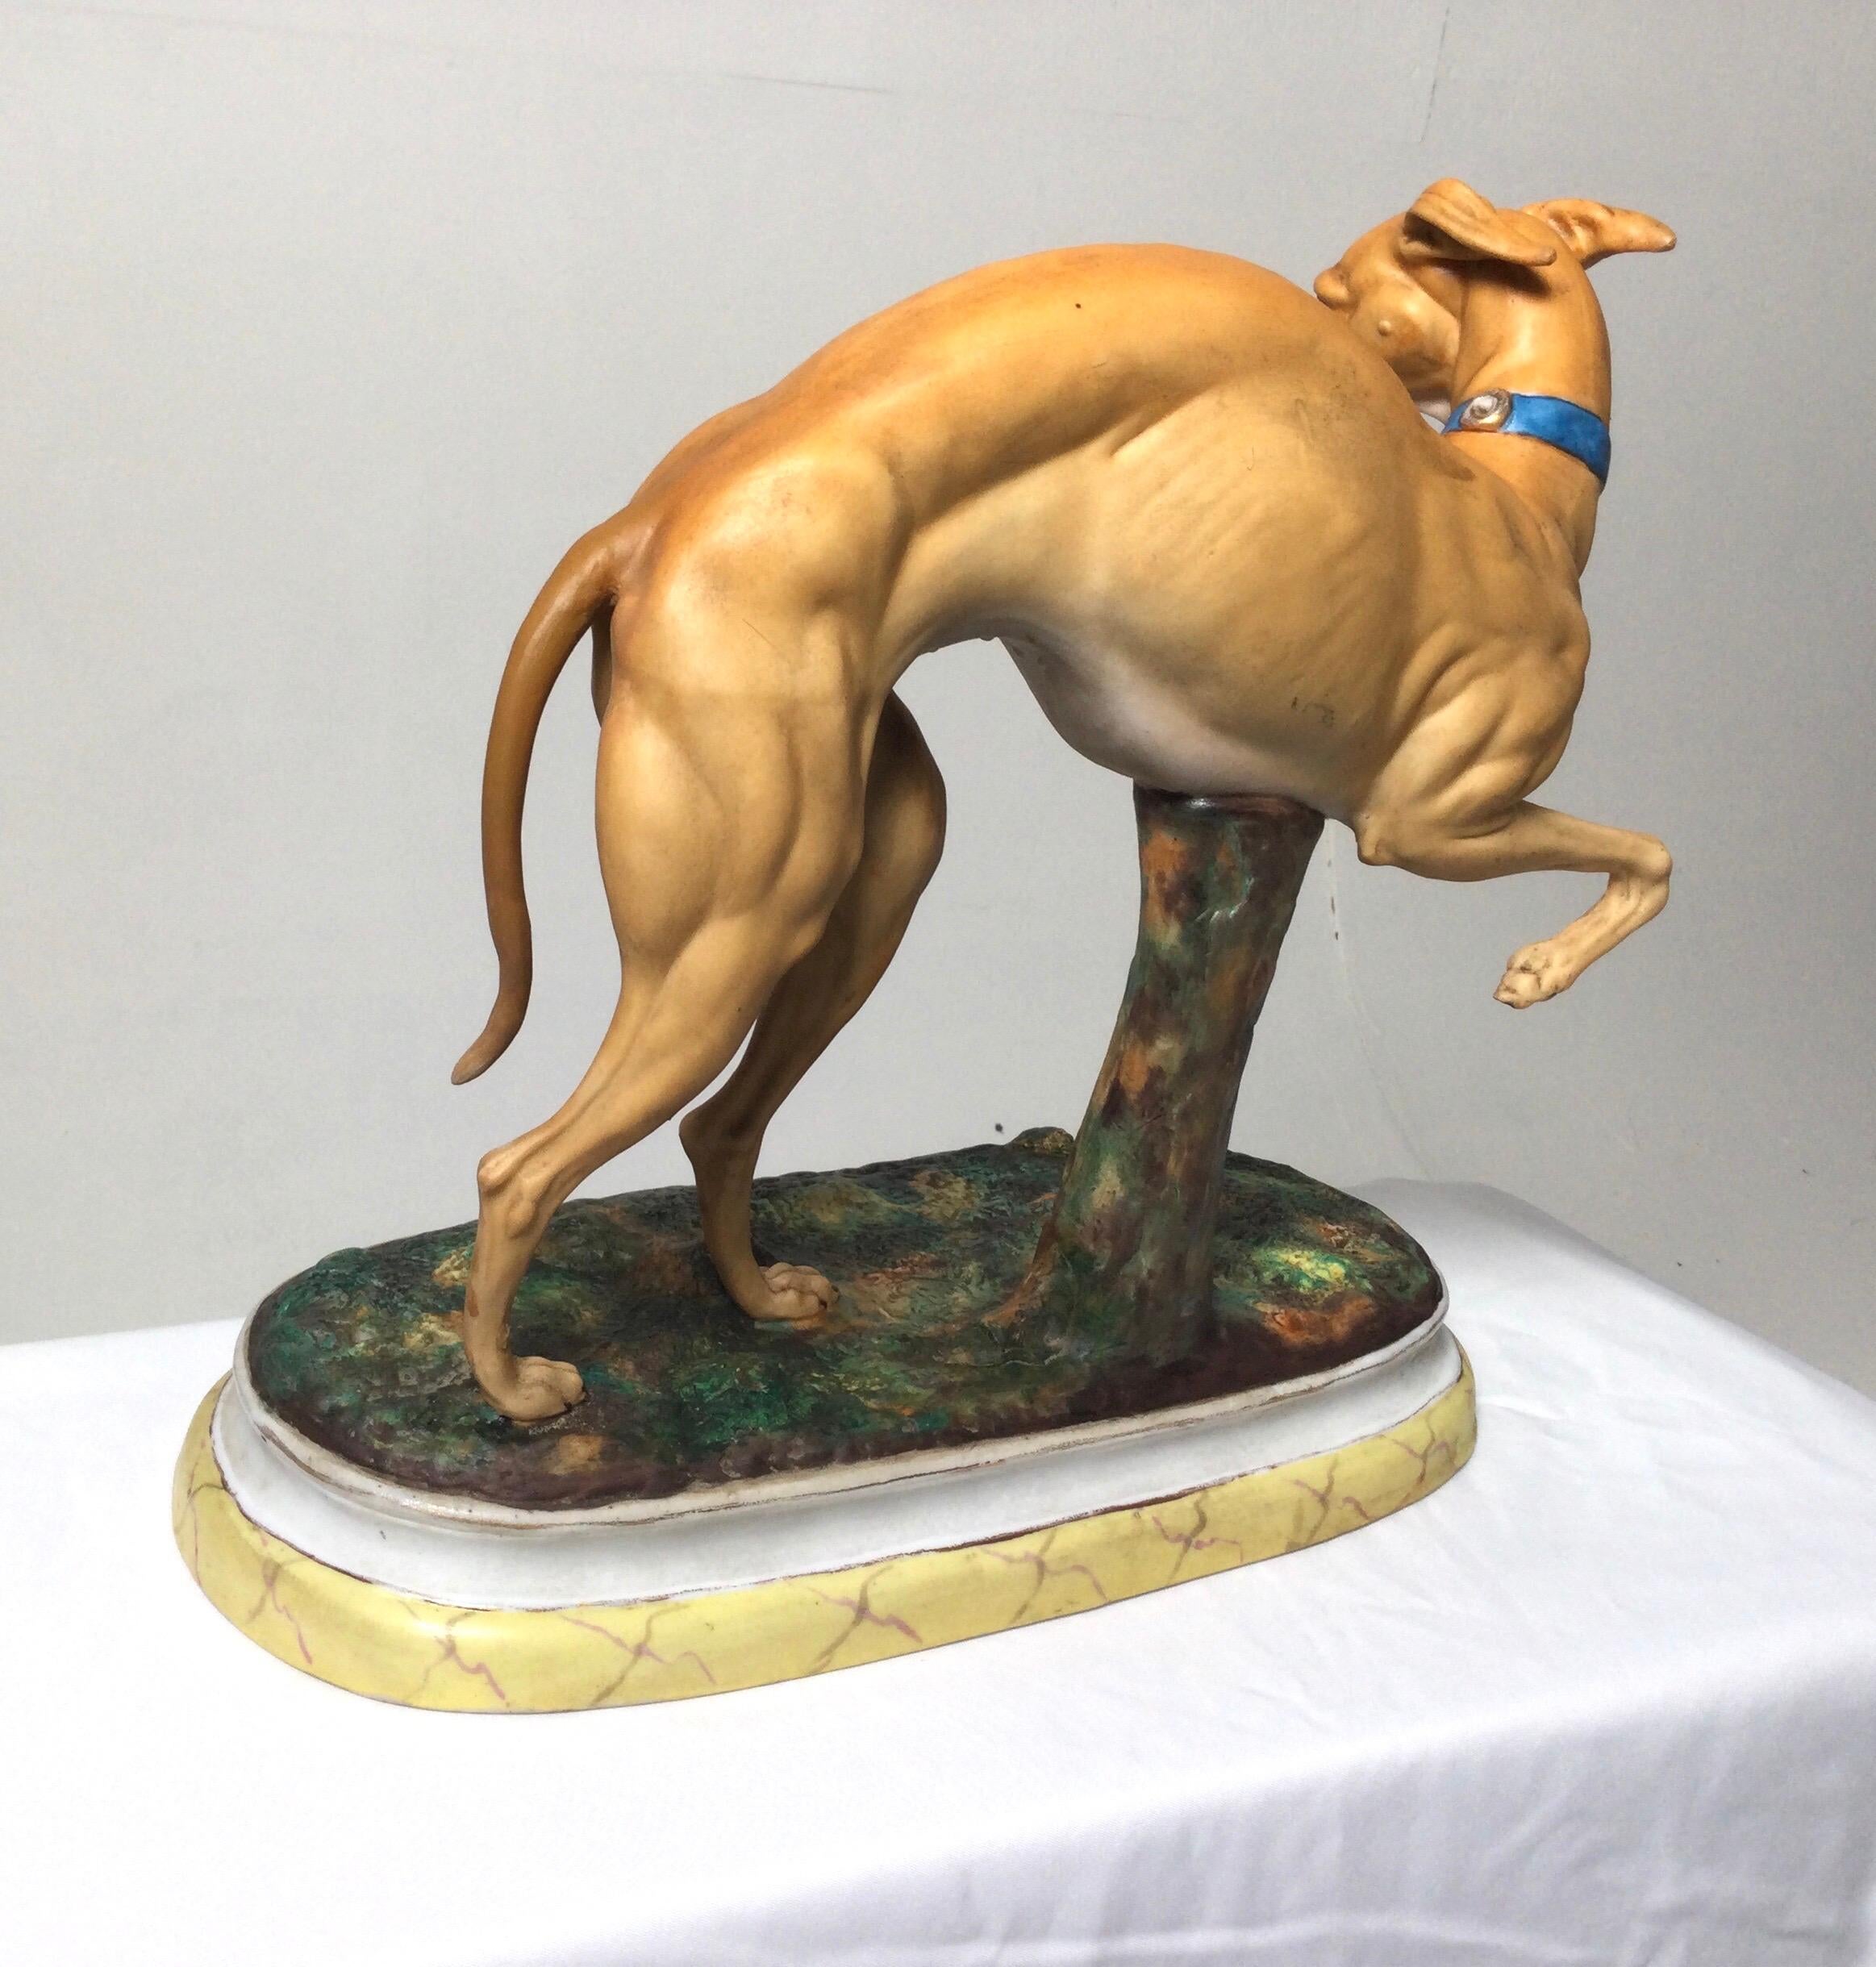 European 19th Century Hand Painted Porcelain Bisque Figure of a Whippet